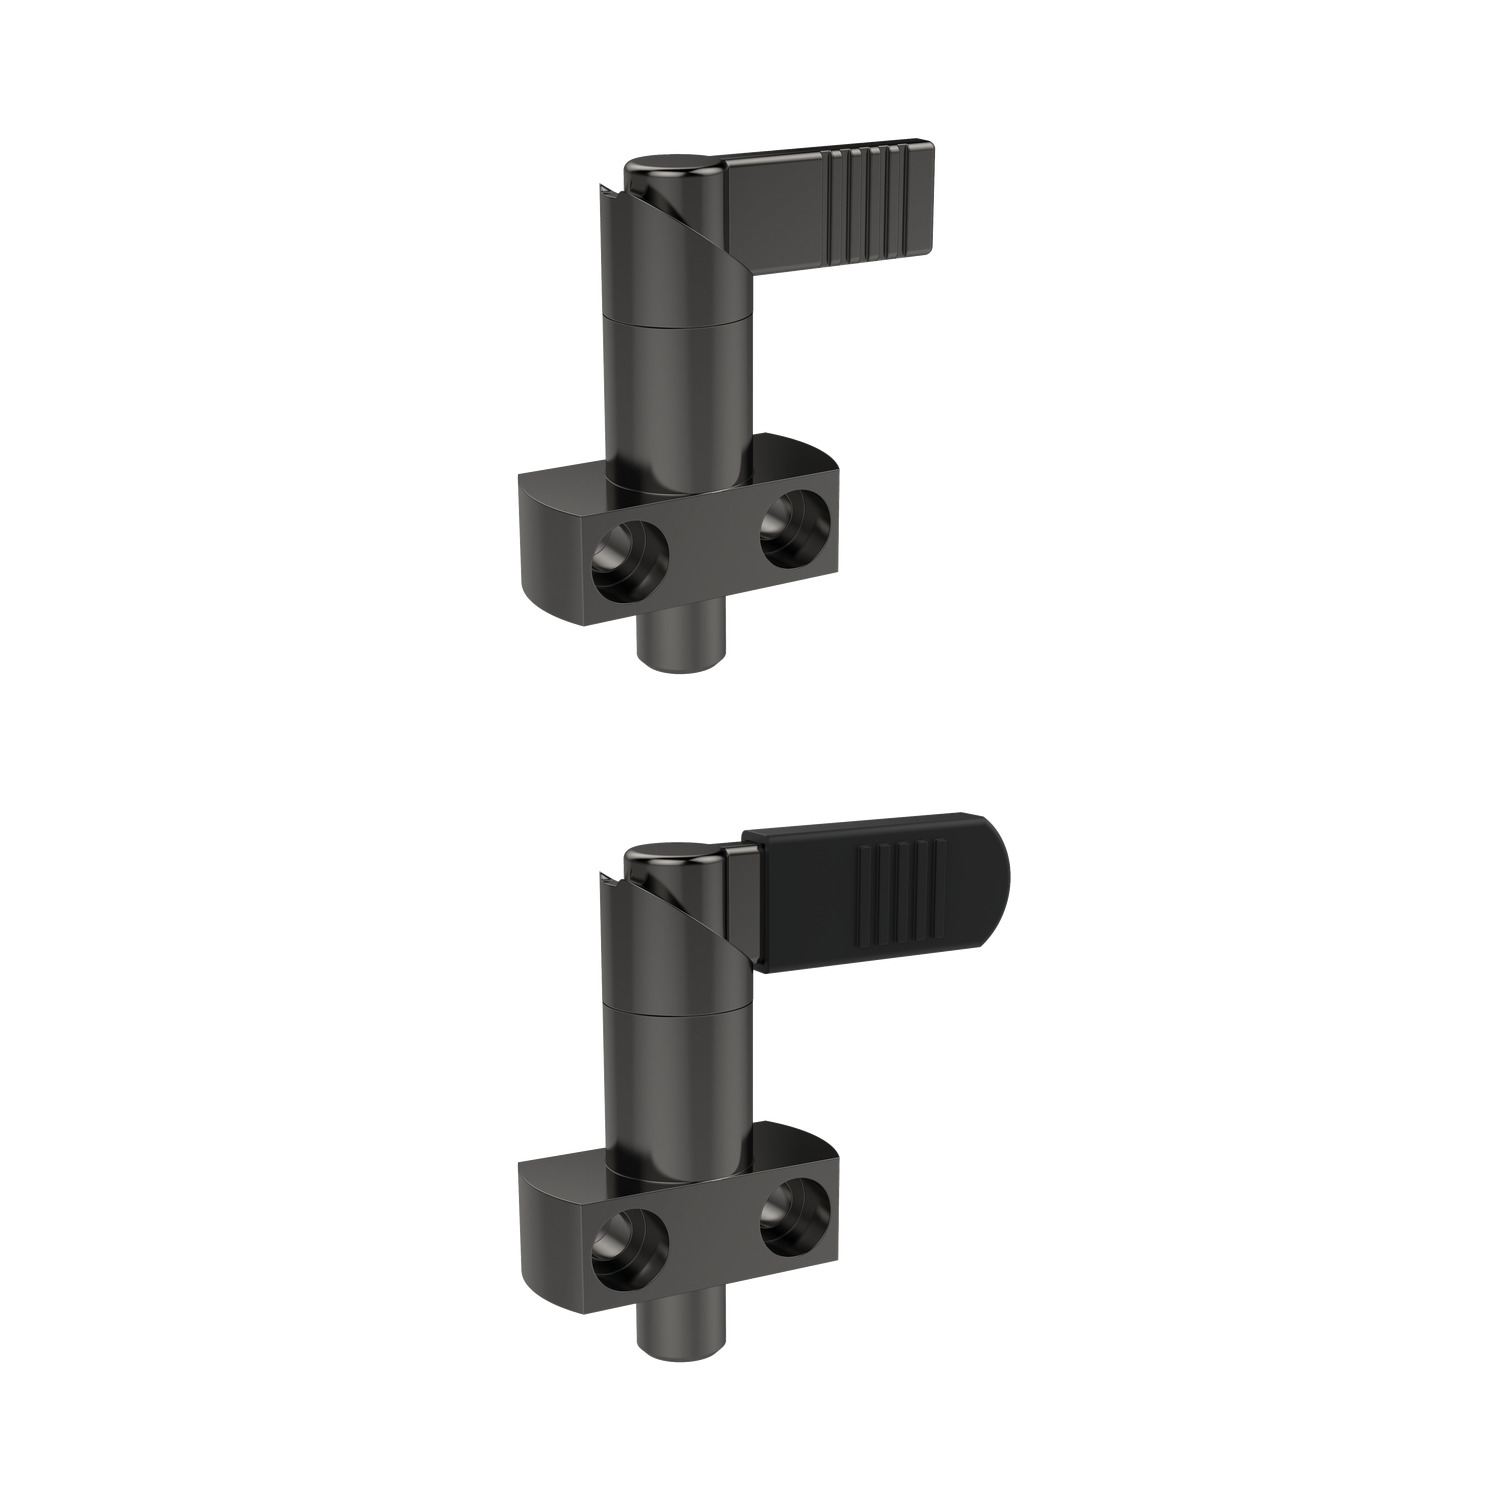 32520.W0384 Index Plungers - Lever Grip - Steel. Without Grip - 12 - 12 - 20